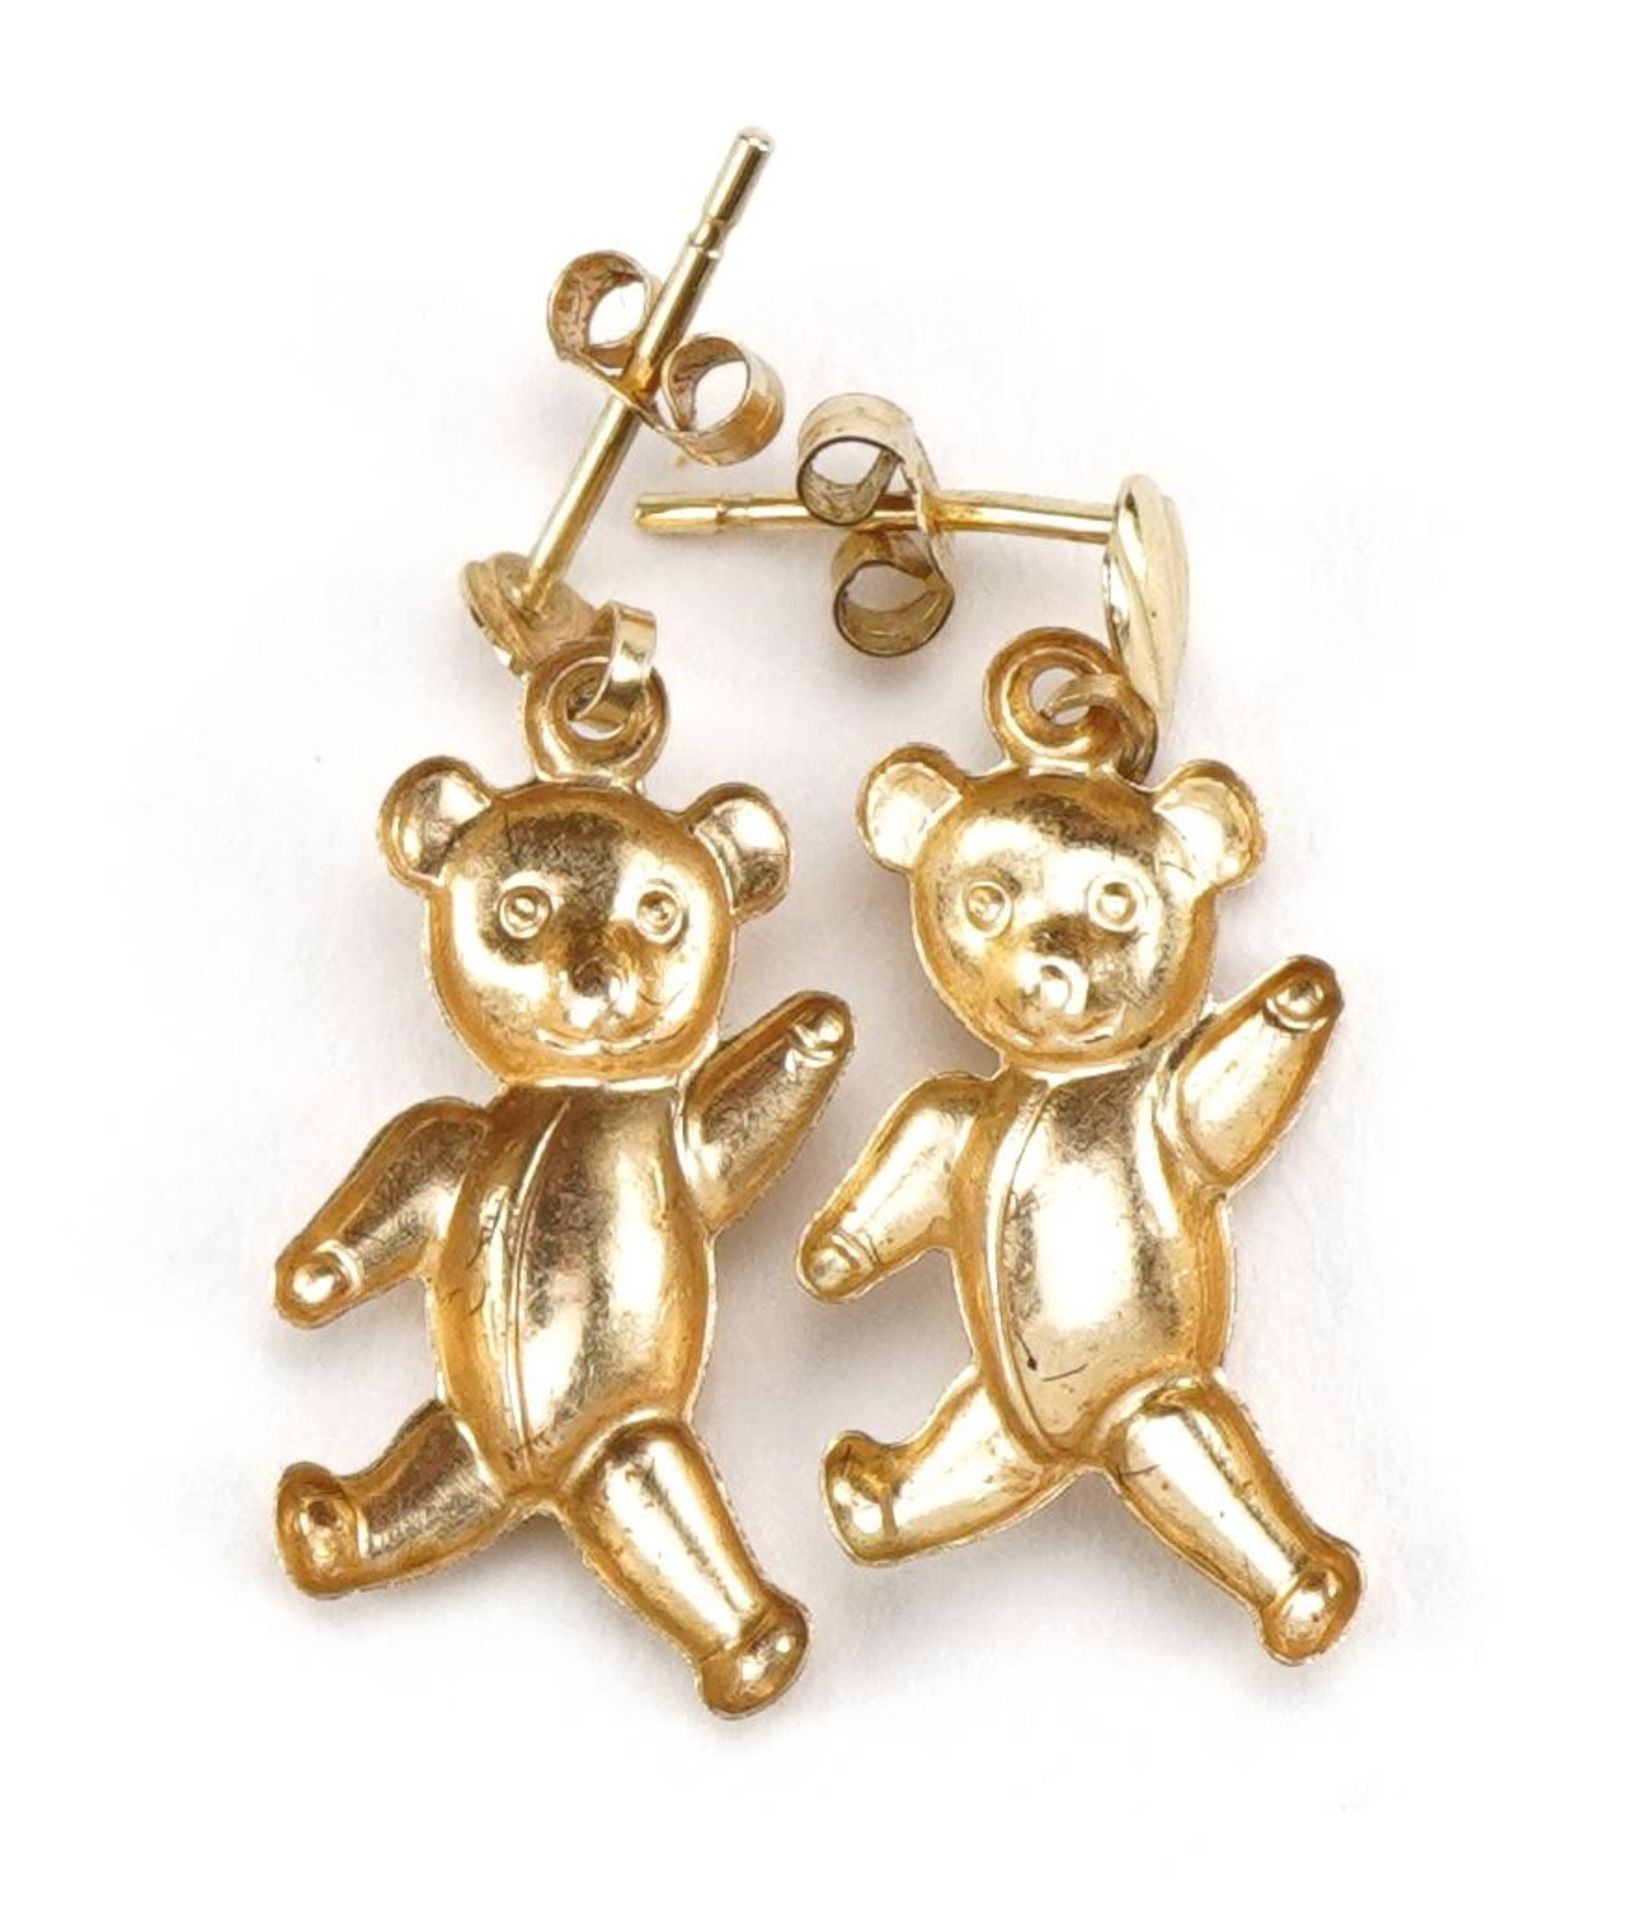 Pair of unmarked gold teddy bear drop earrings, the backs marked 9ct, 2.1cm high, 0.4g : For further - Image 3 of 4